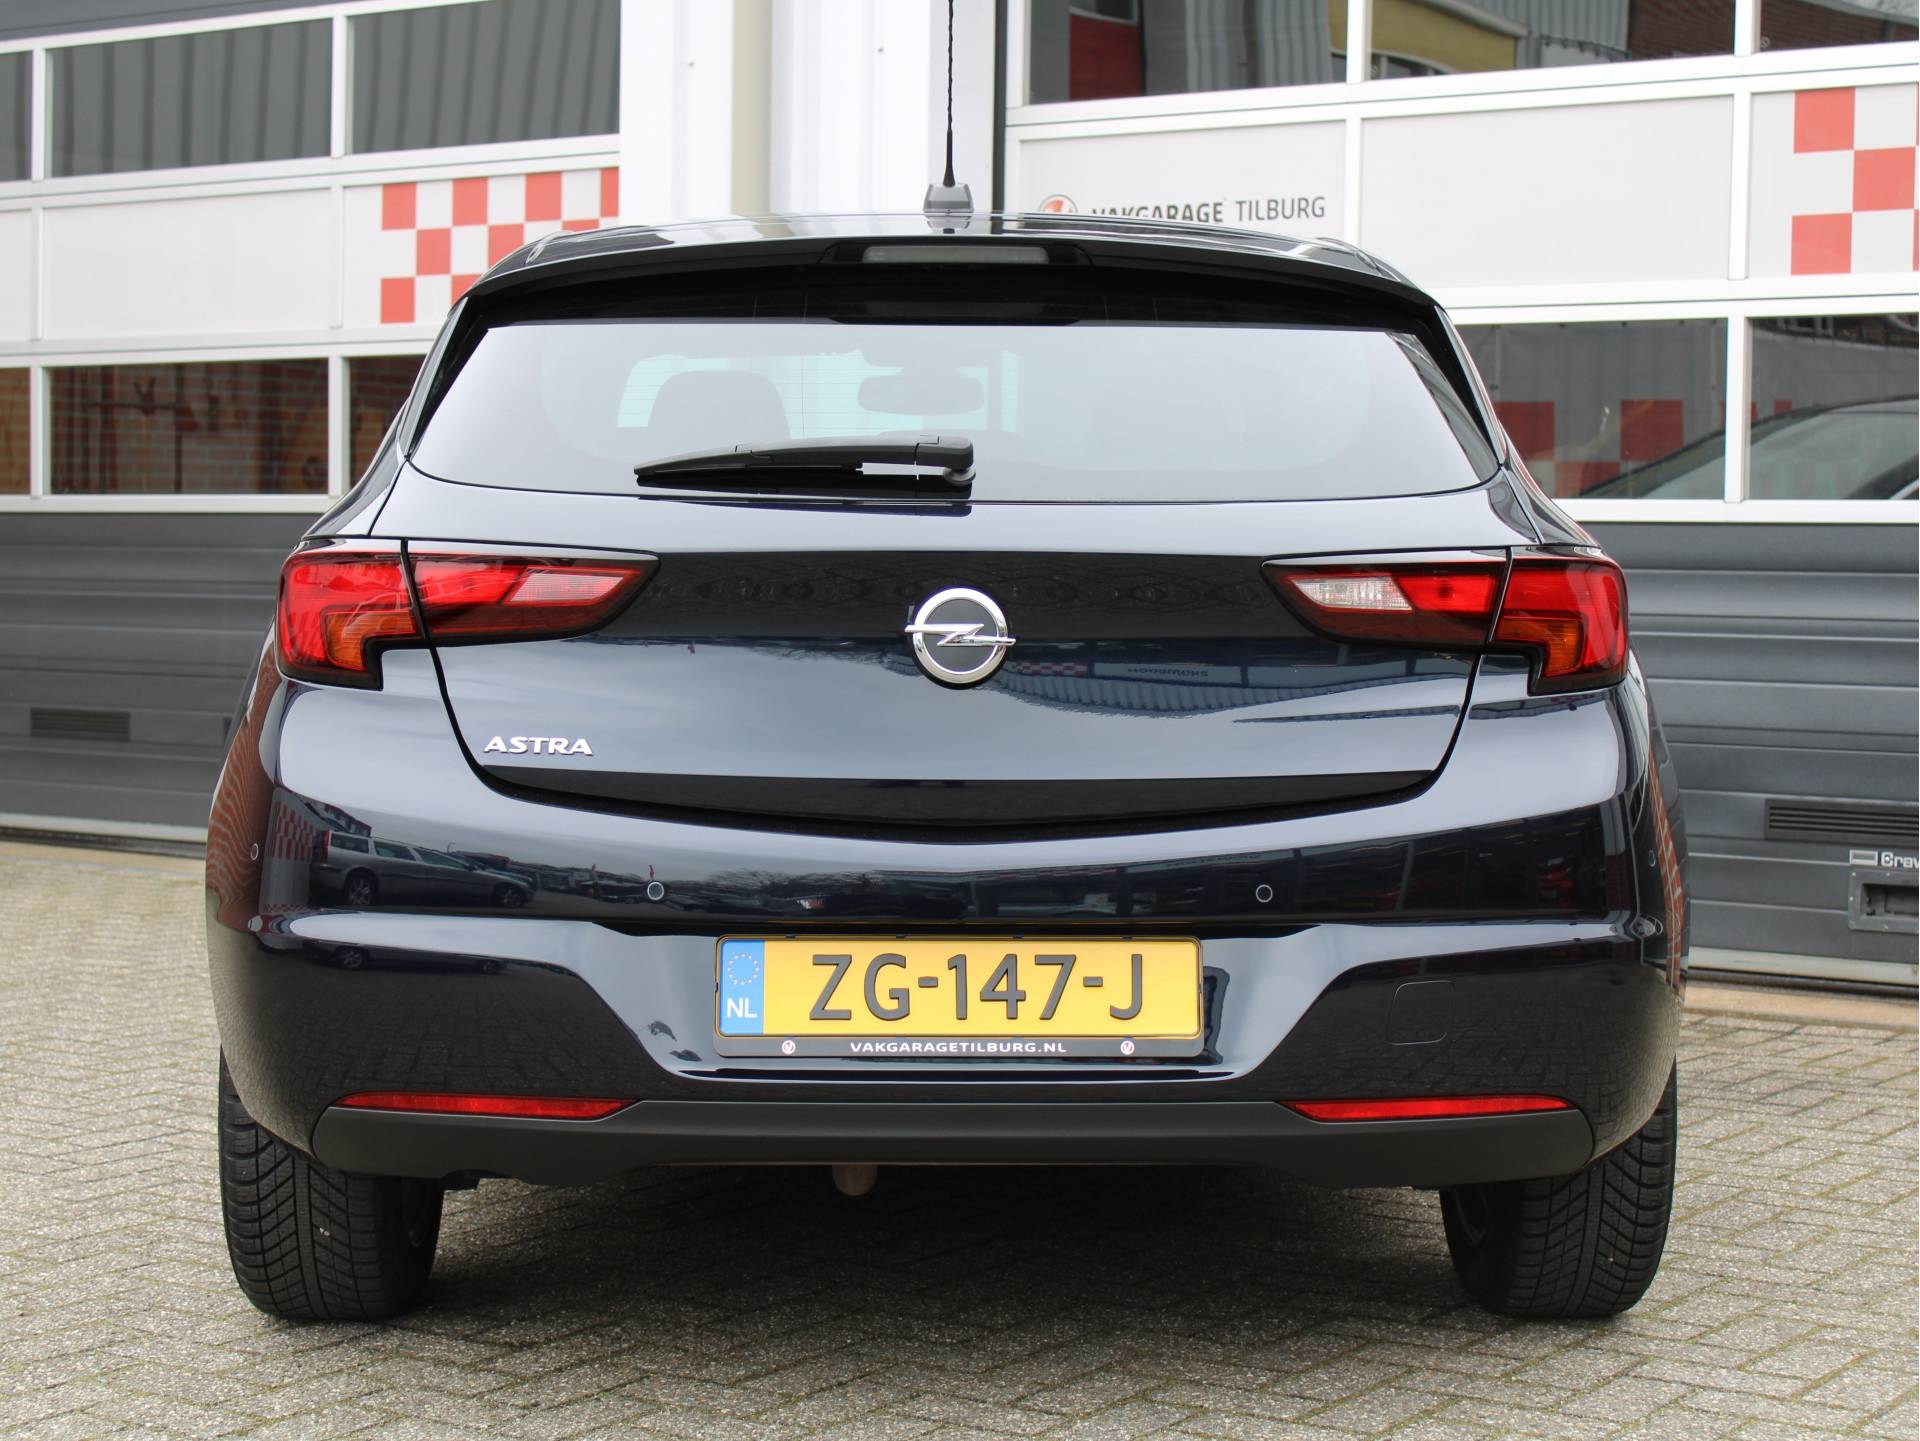 Opel Astra 1.4 Turbo 120Jaar Edition 150PK Automaat /NAVI/PDC/Climate/Cruise control/DAB+/LED/Apple carplay/Android auto/Donker glas/NAP! 1e eig! - 32/41